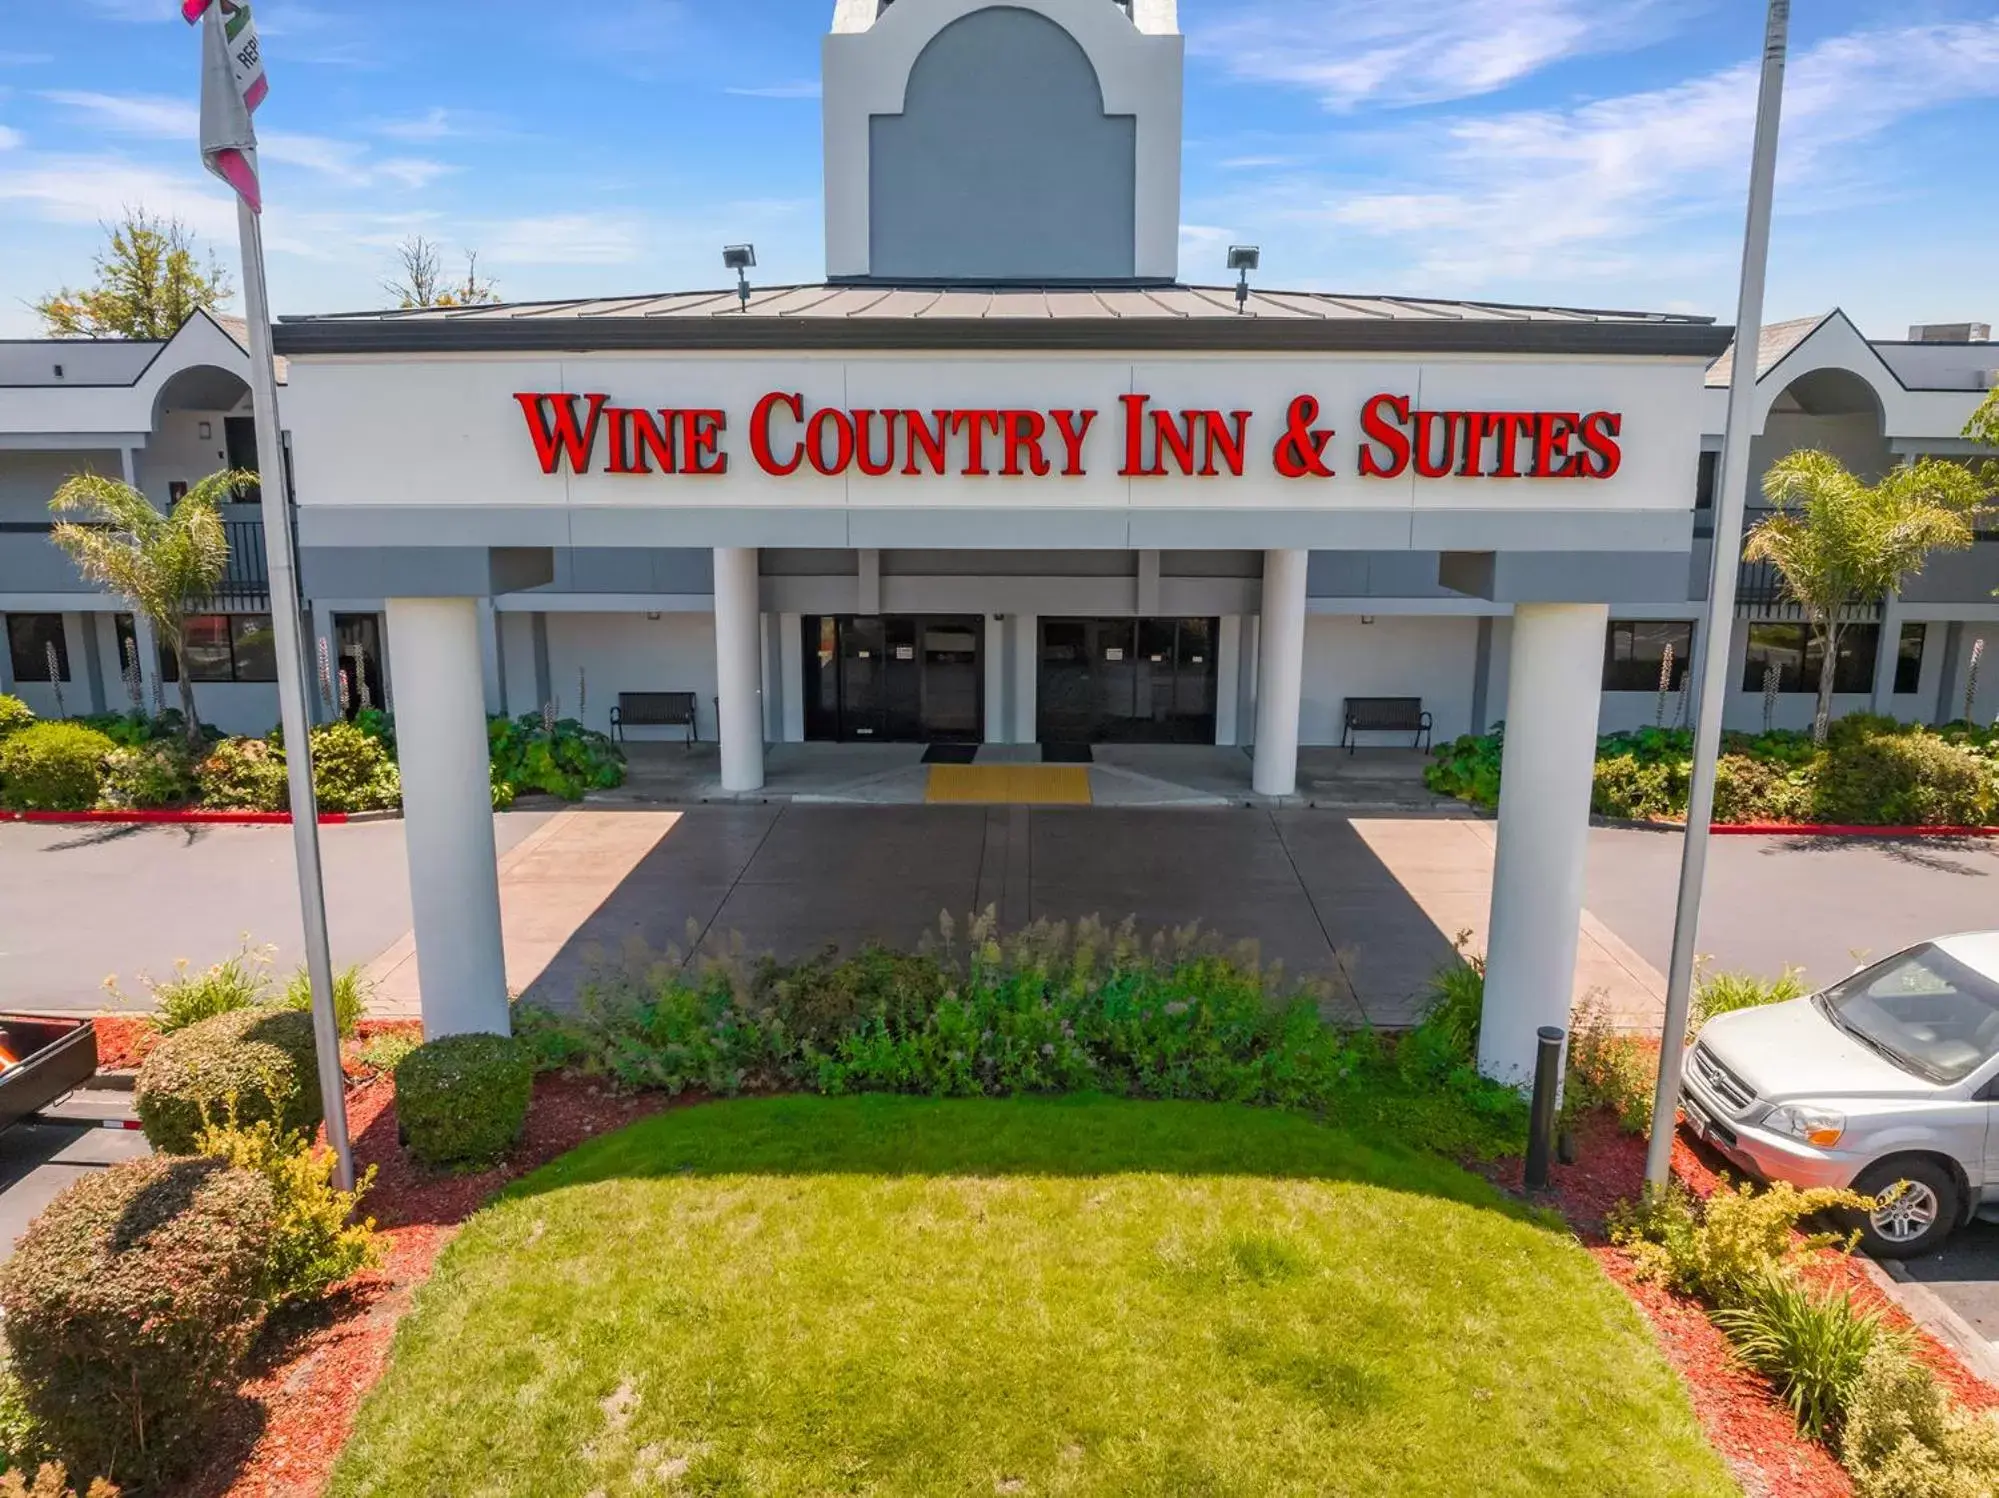 Facade/entrance, Property Building in Best Western Plus Wine Country Inn & Suites